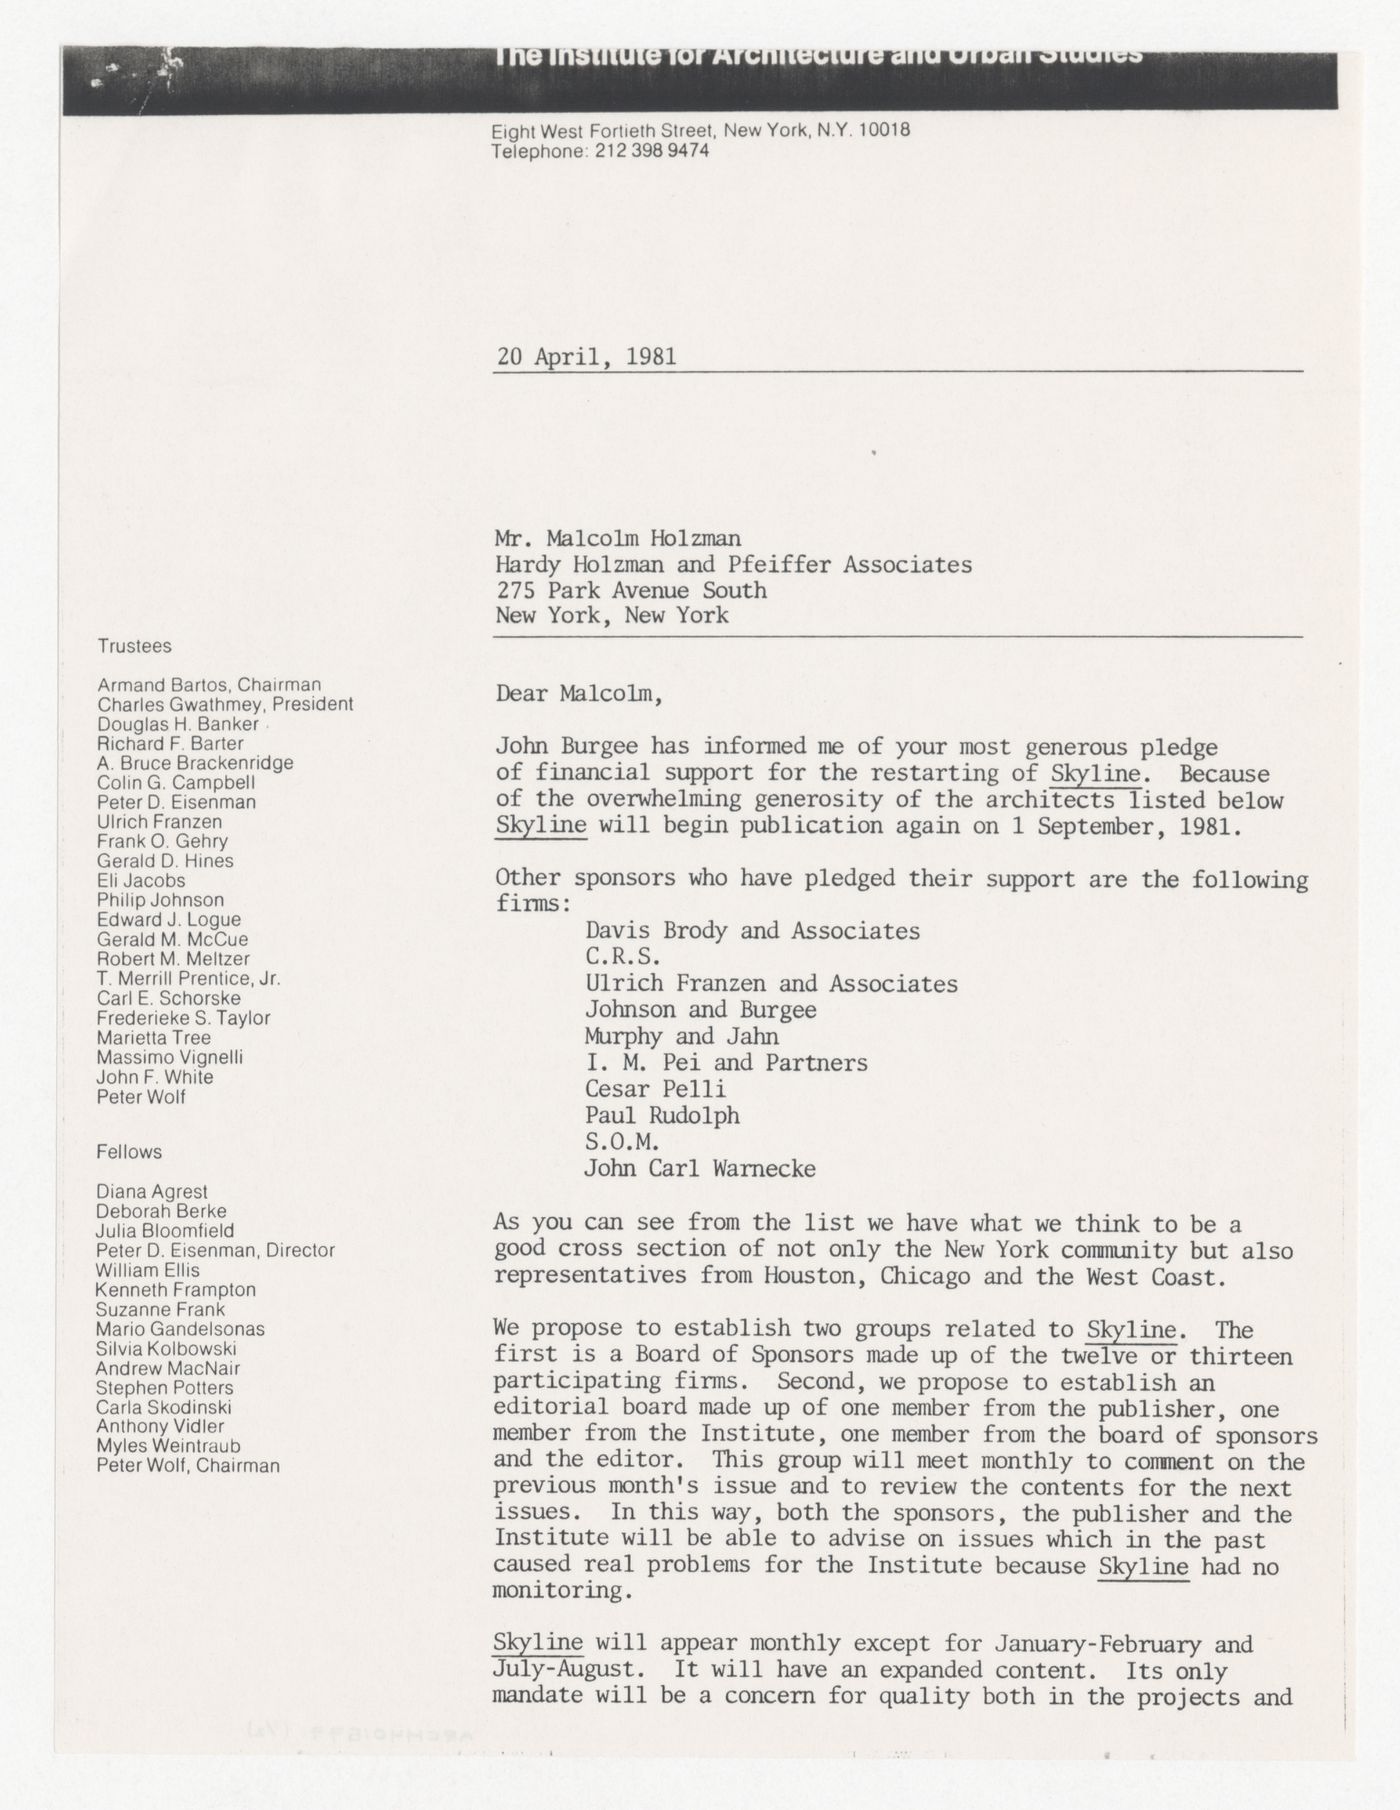 Letter from Peter D. Eisenman to Malcolm Holzman about sponsorship for Skyline